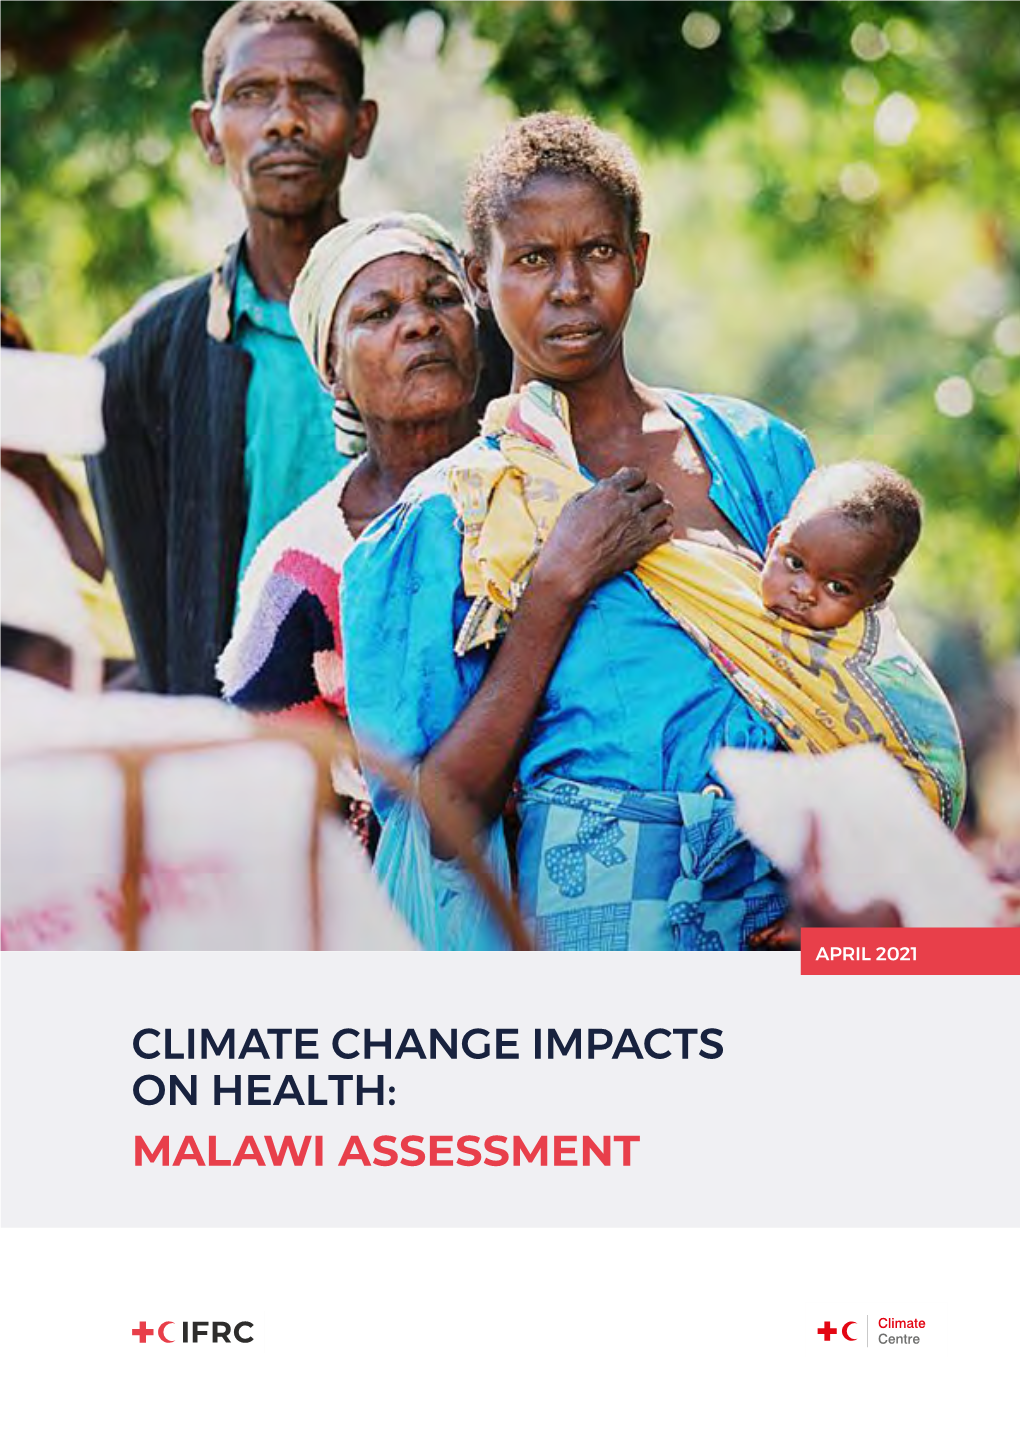 Malawi Assessment Climate Change Impacts on Health and Livelihoods: Malawi Assessment